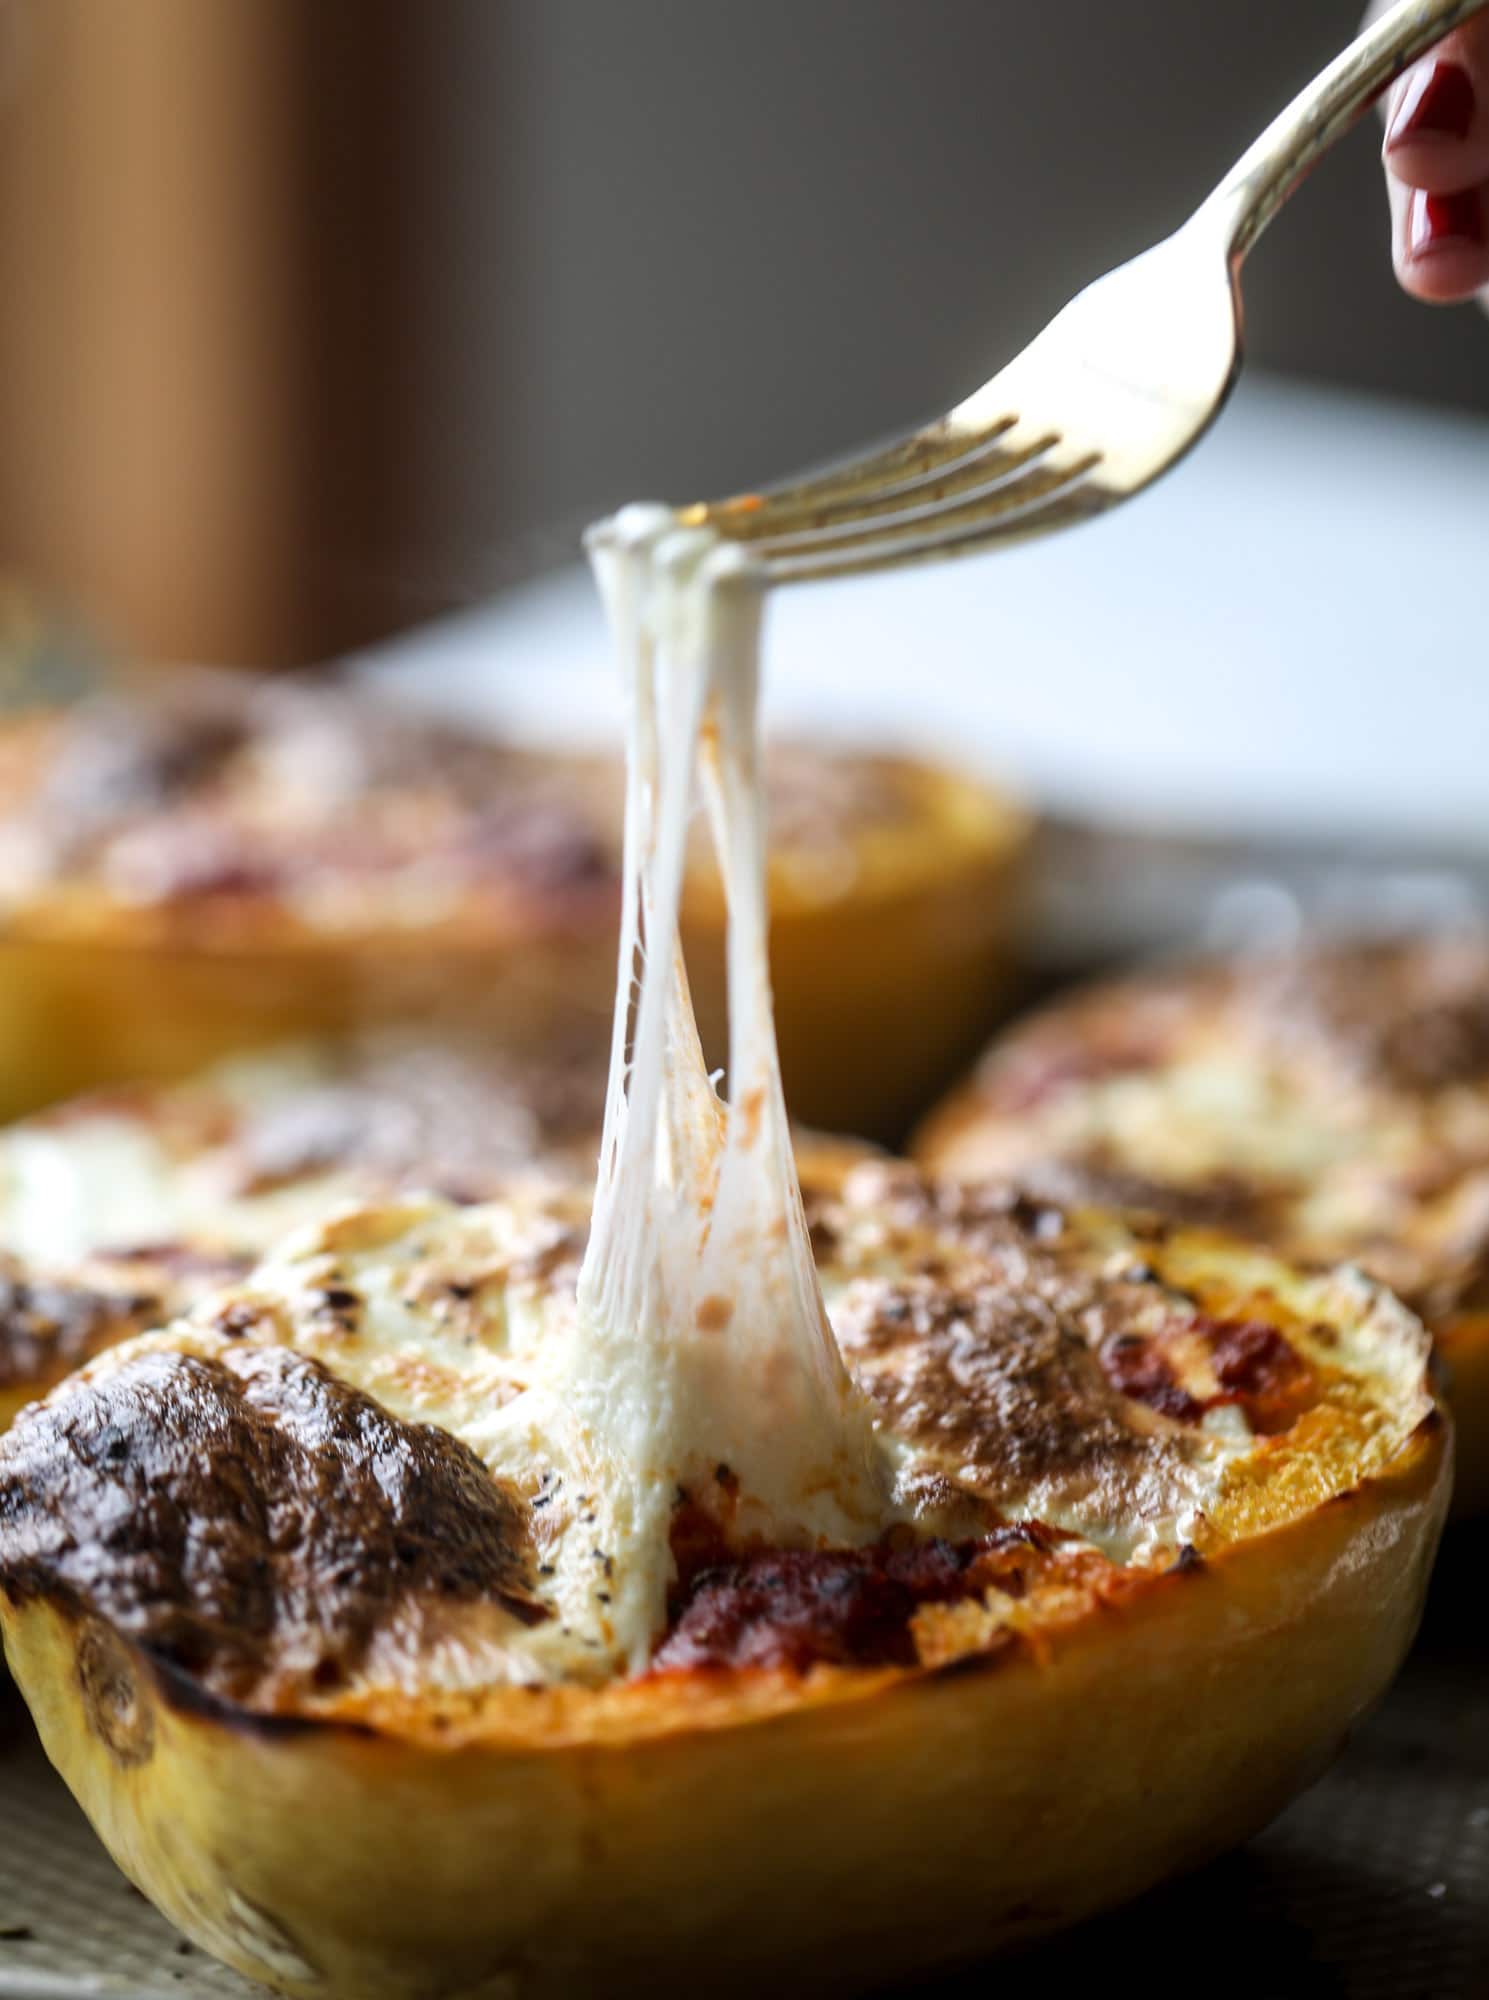 Spaghetti squash parmesan is a delicious weeknight meal! Topped with marinara or bolognese, melty cheese and fresh herbs, it's easy and delicious! I howsweeteats.com #spaghettisquash #parmesan